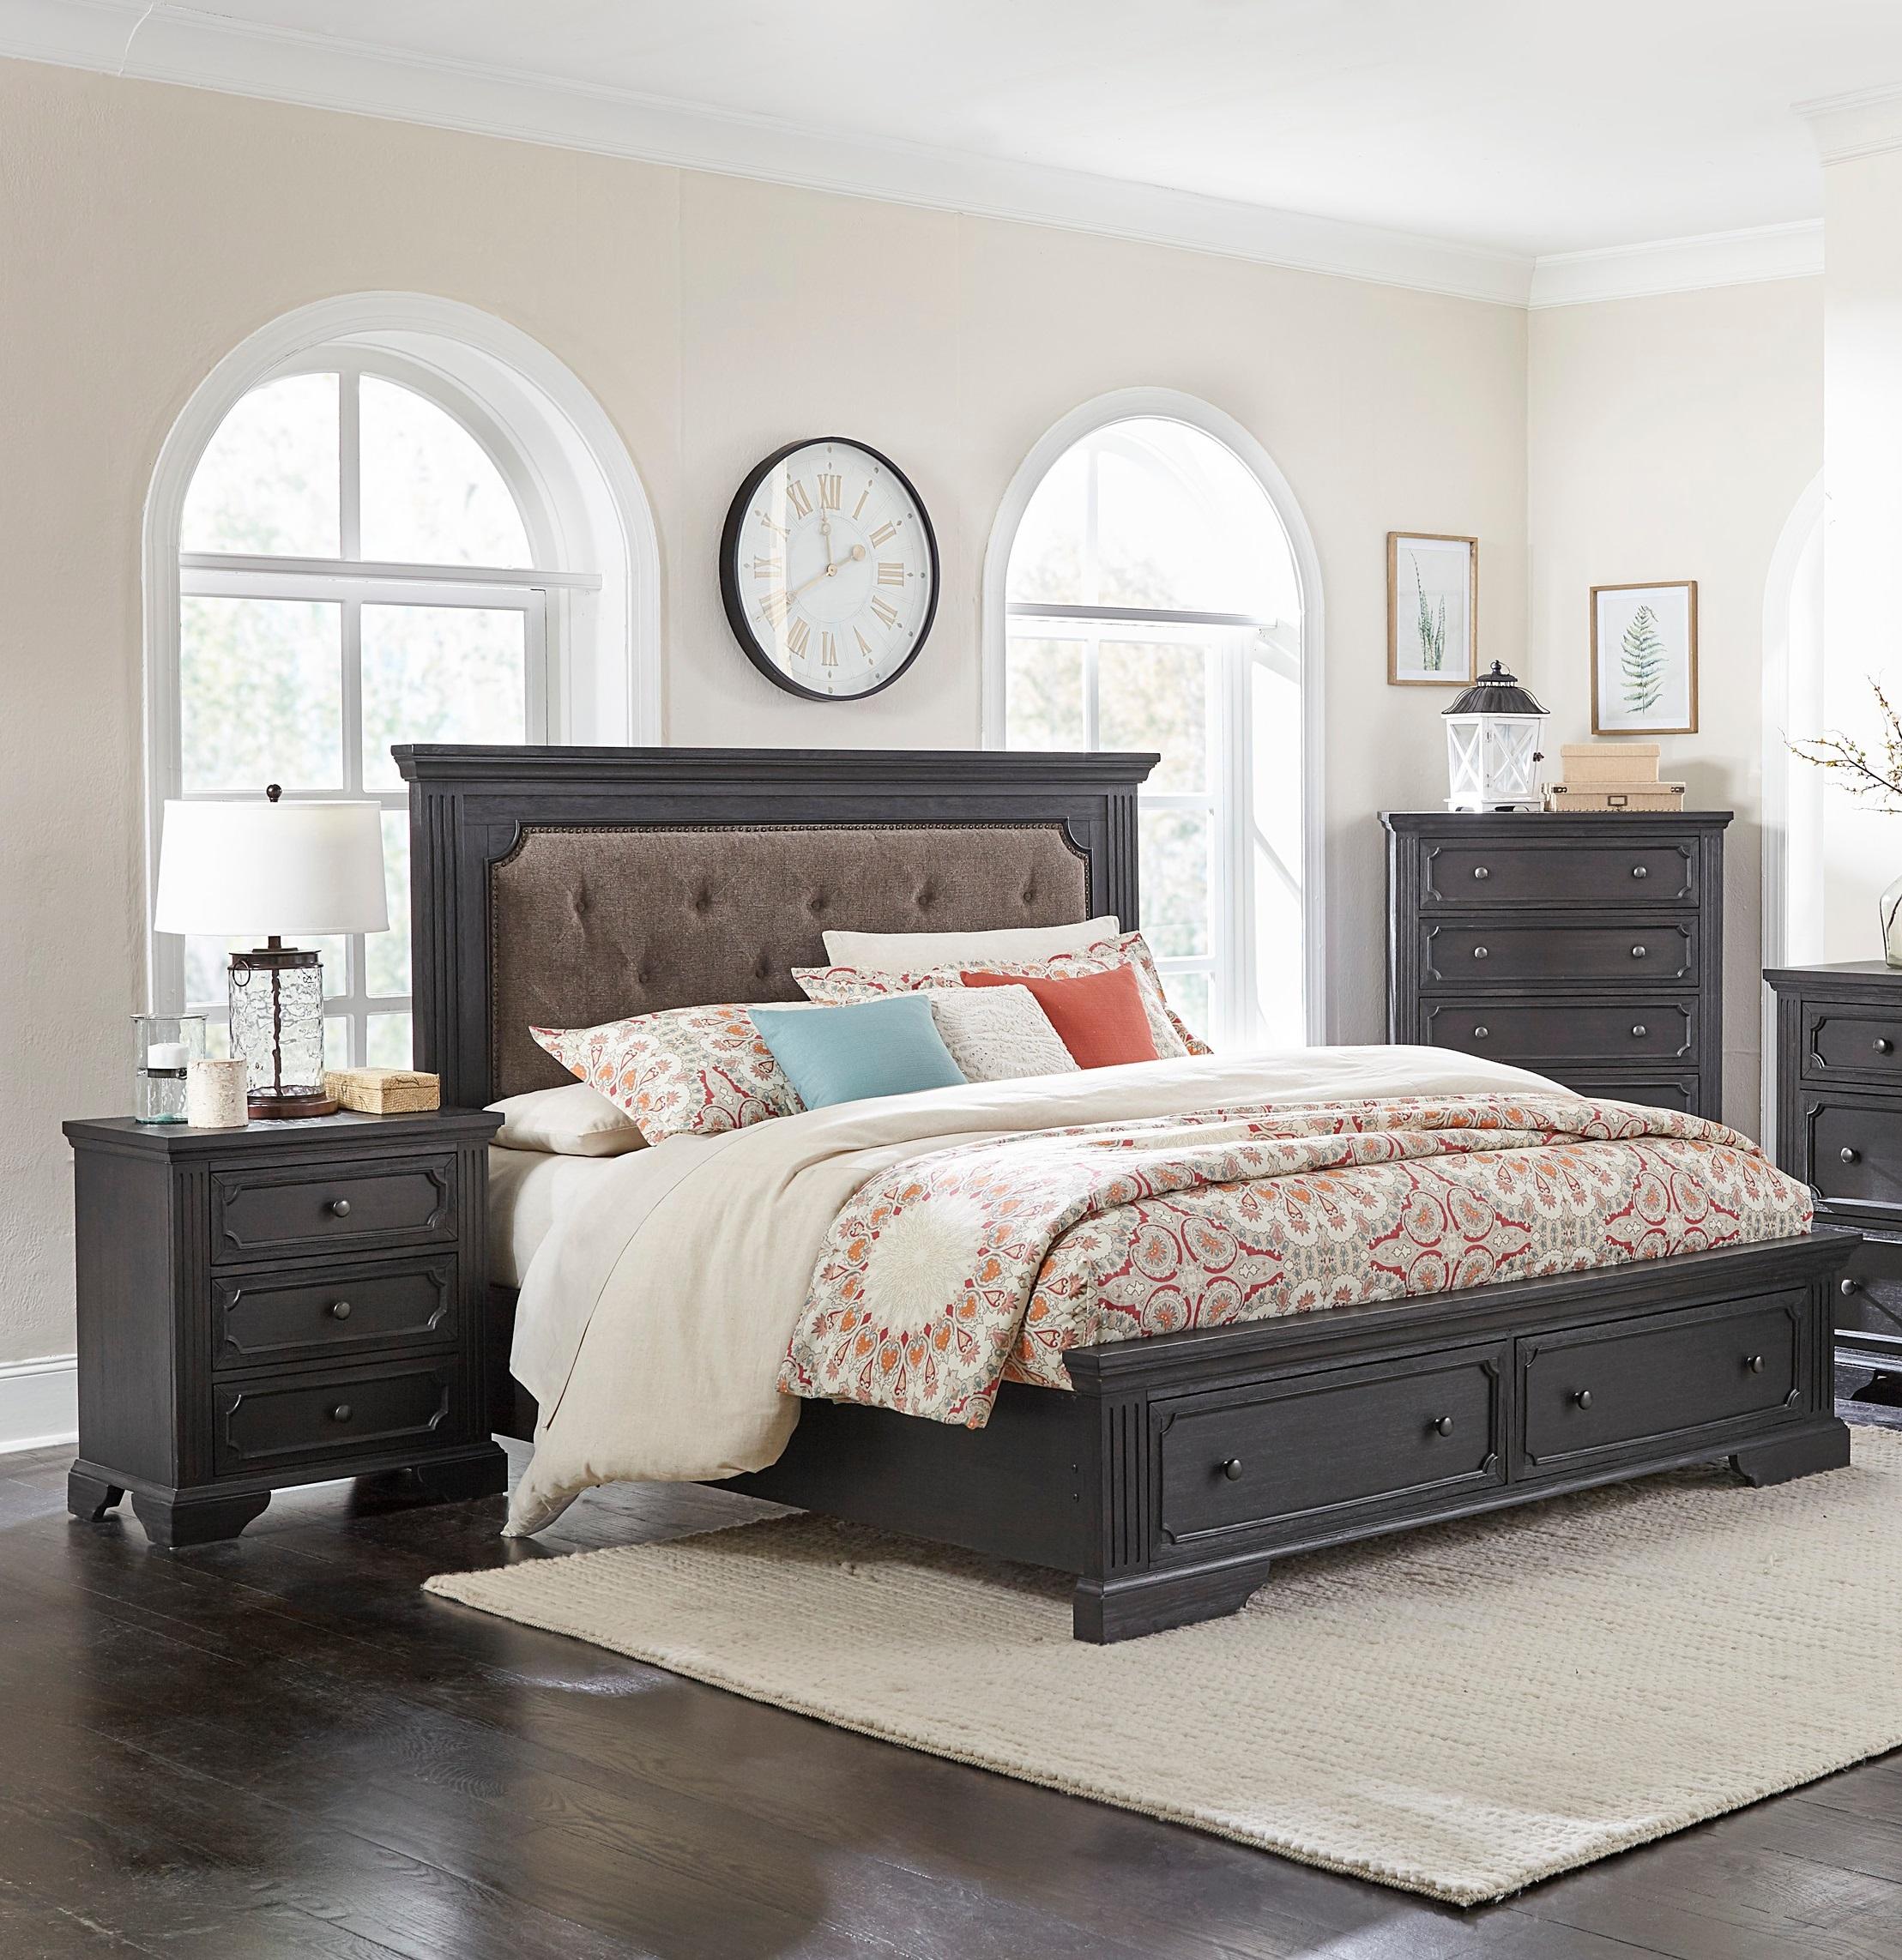 Rustic Bedroom Set 1647-1-3PC Bolingbrook 1647-1-3PC in Charcoal Polyester